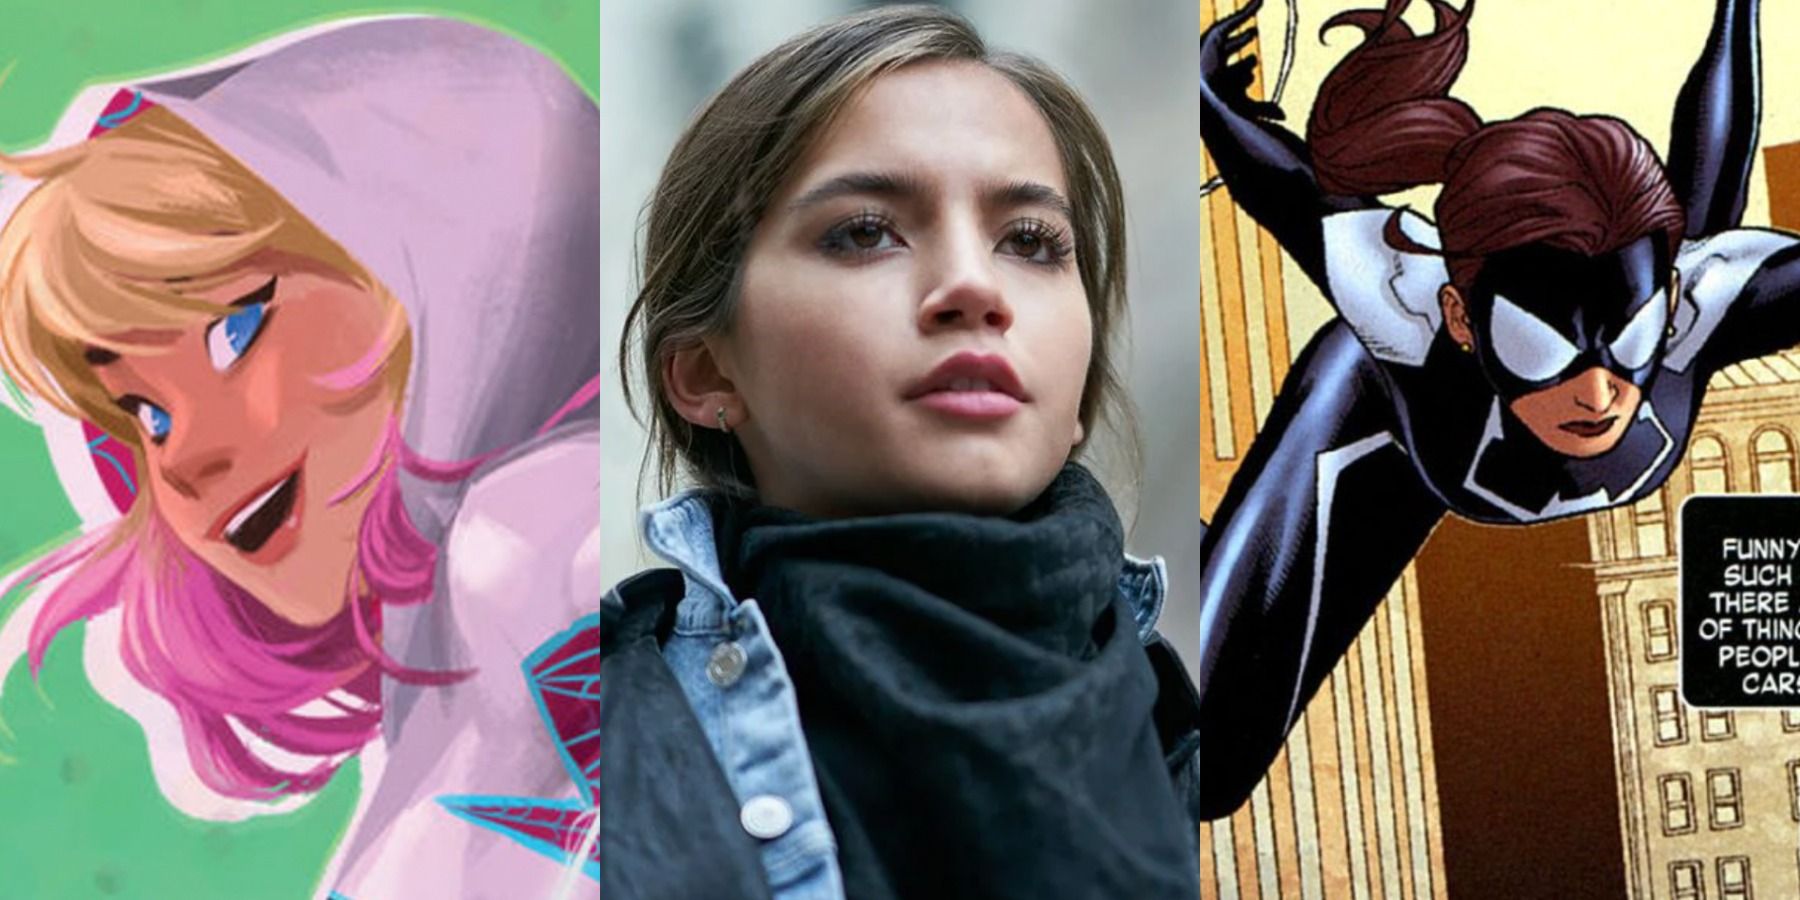 A split image features Marvel comics' Gwen Stacy, Isabela Merced in Sweet Girl, and Marvel comics' Anya Corazon